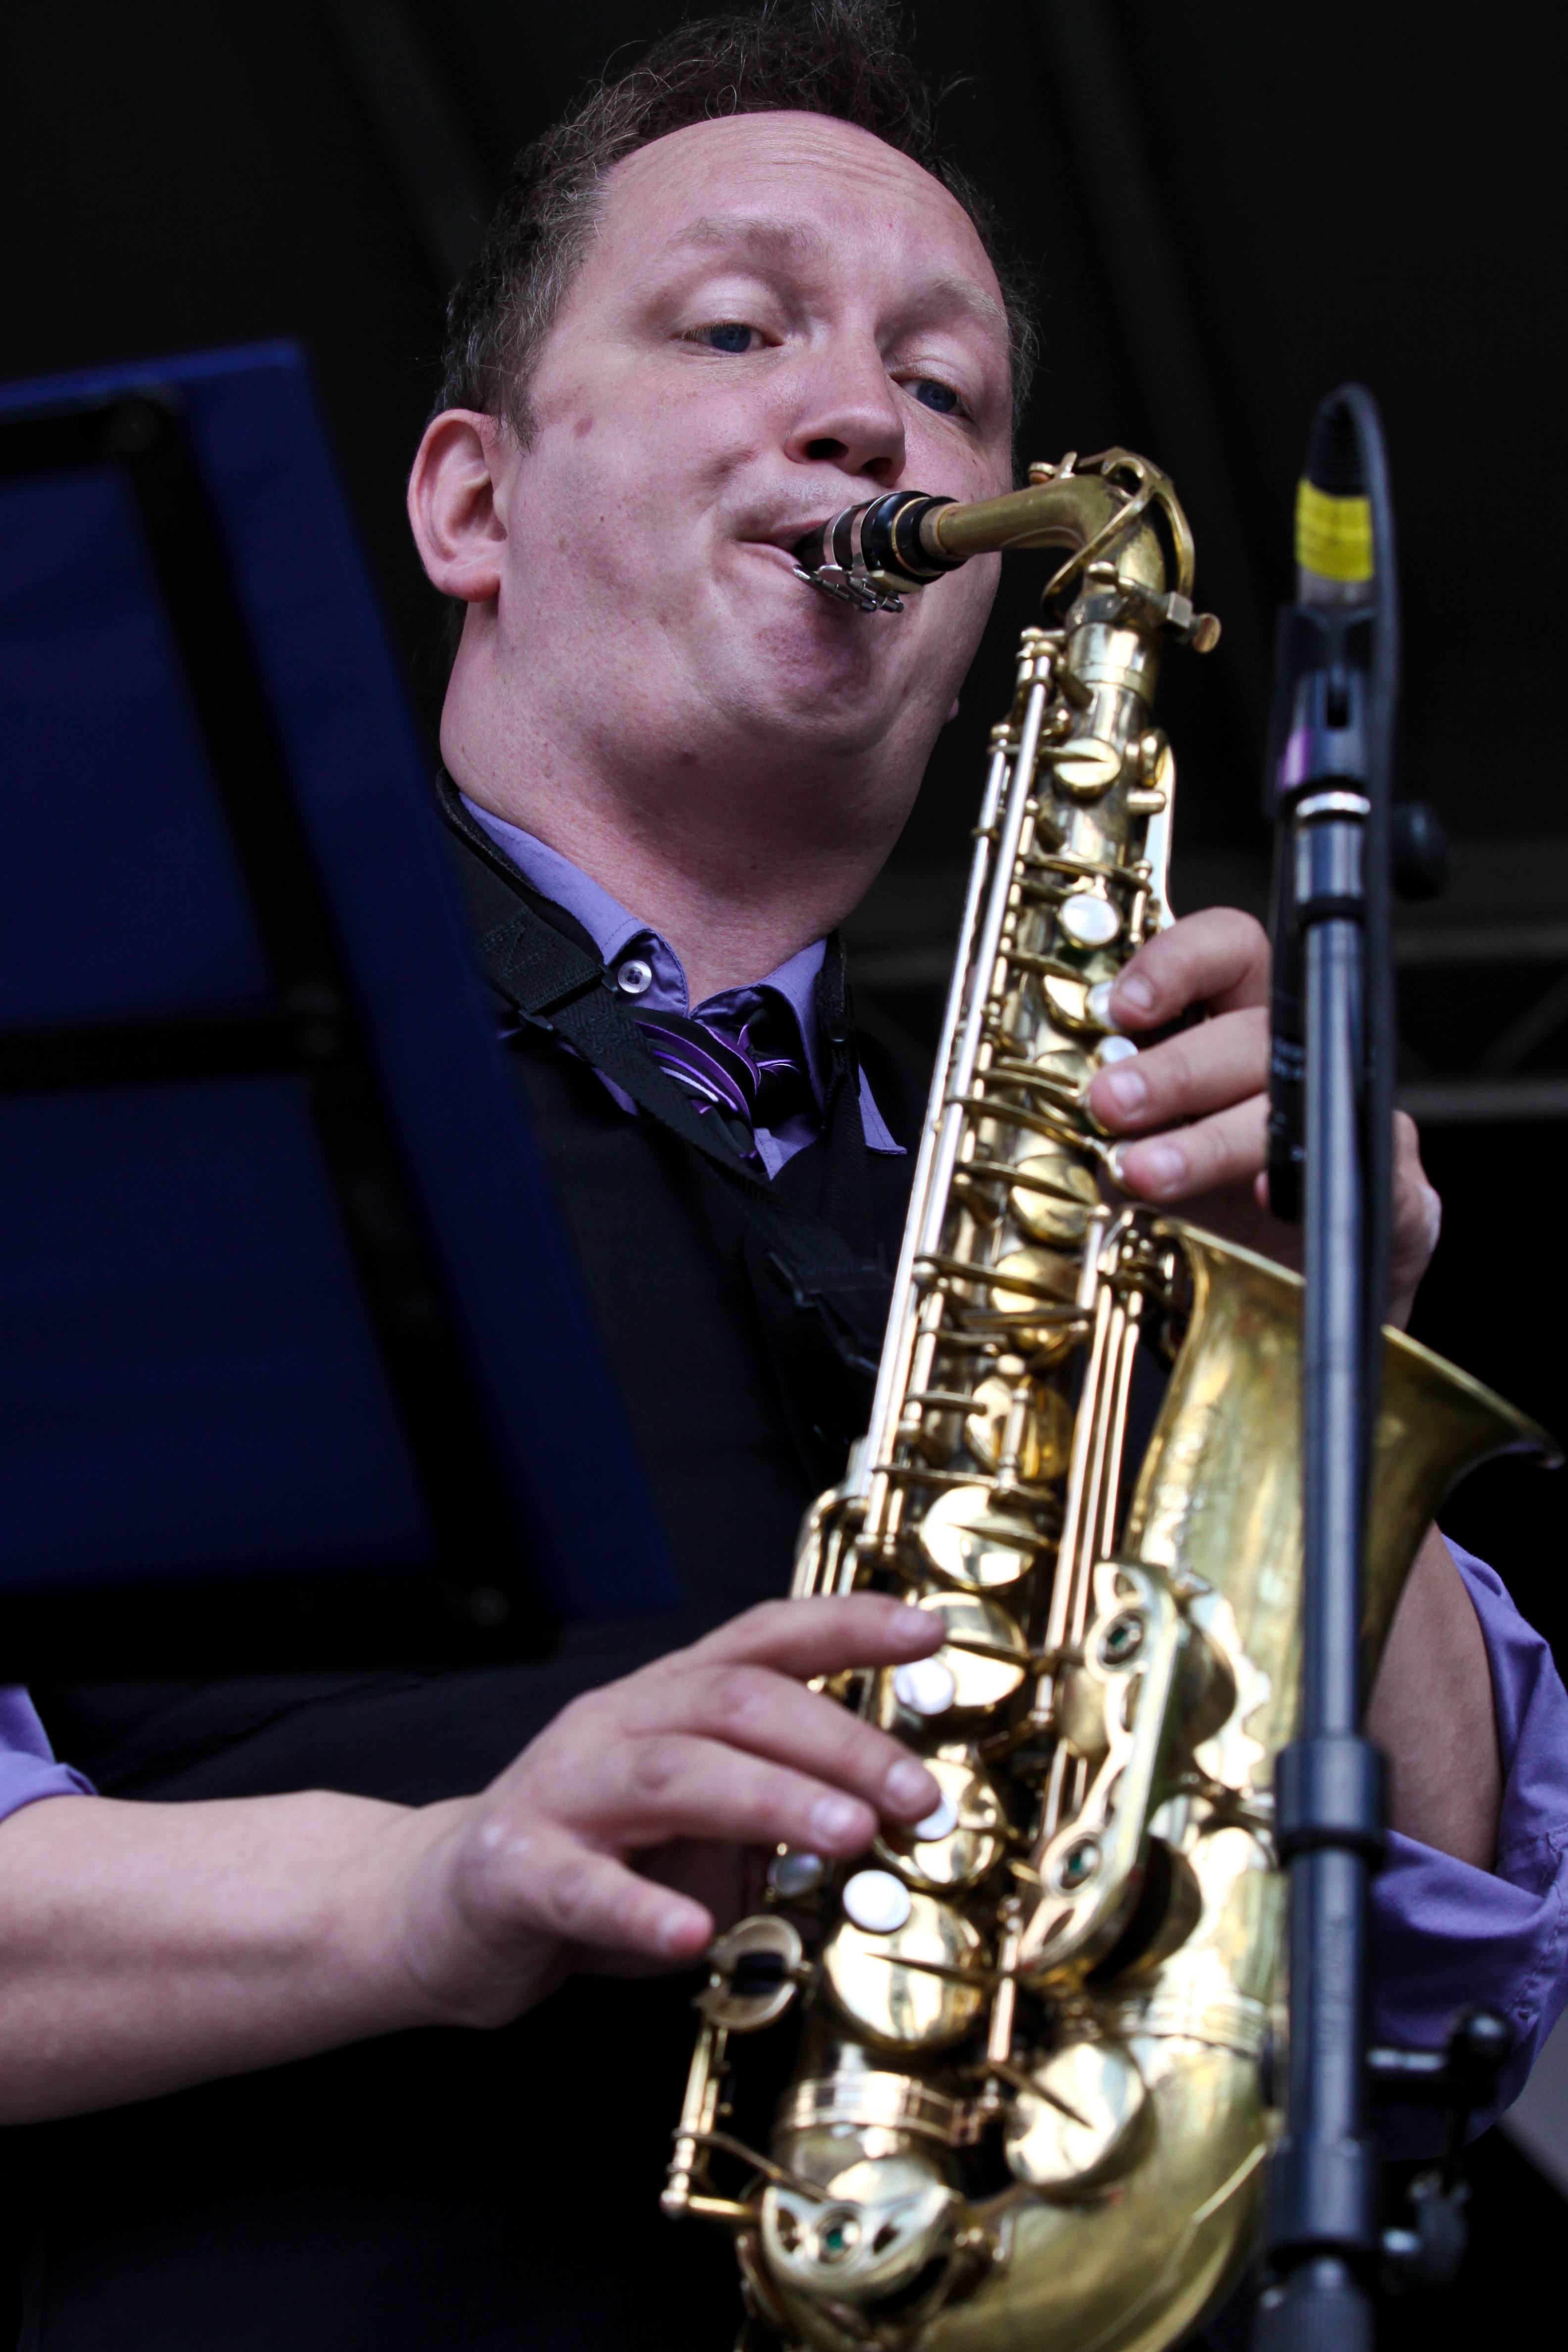 VIRTUOSITY – The Don Berner Sextet performs at The District Eatery and Lounge on Jan. 30.